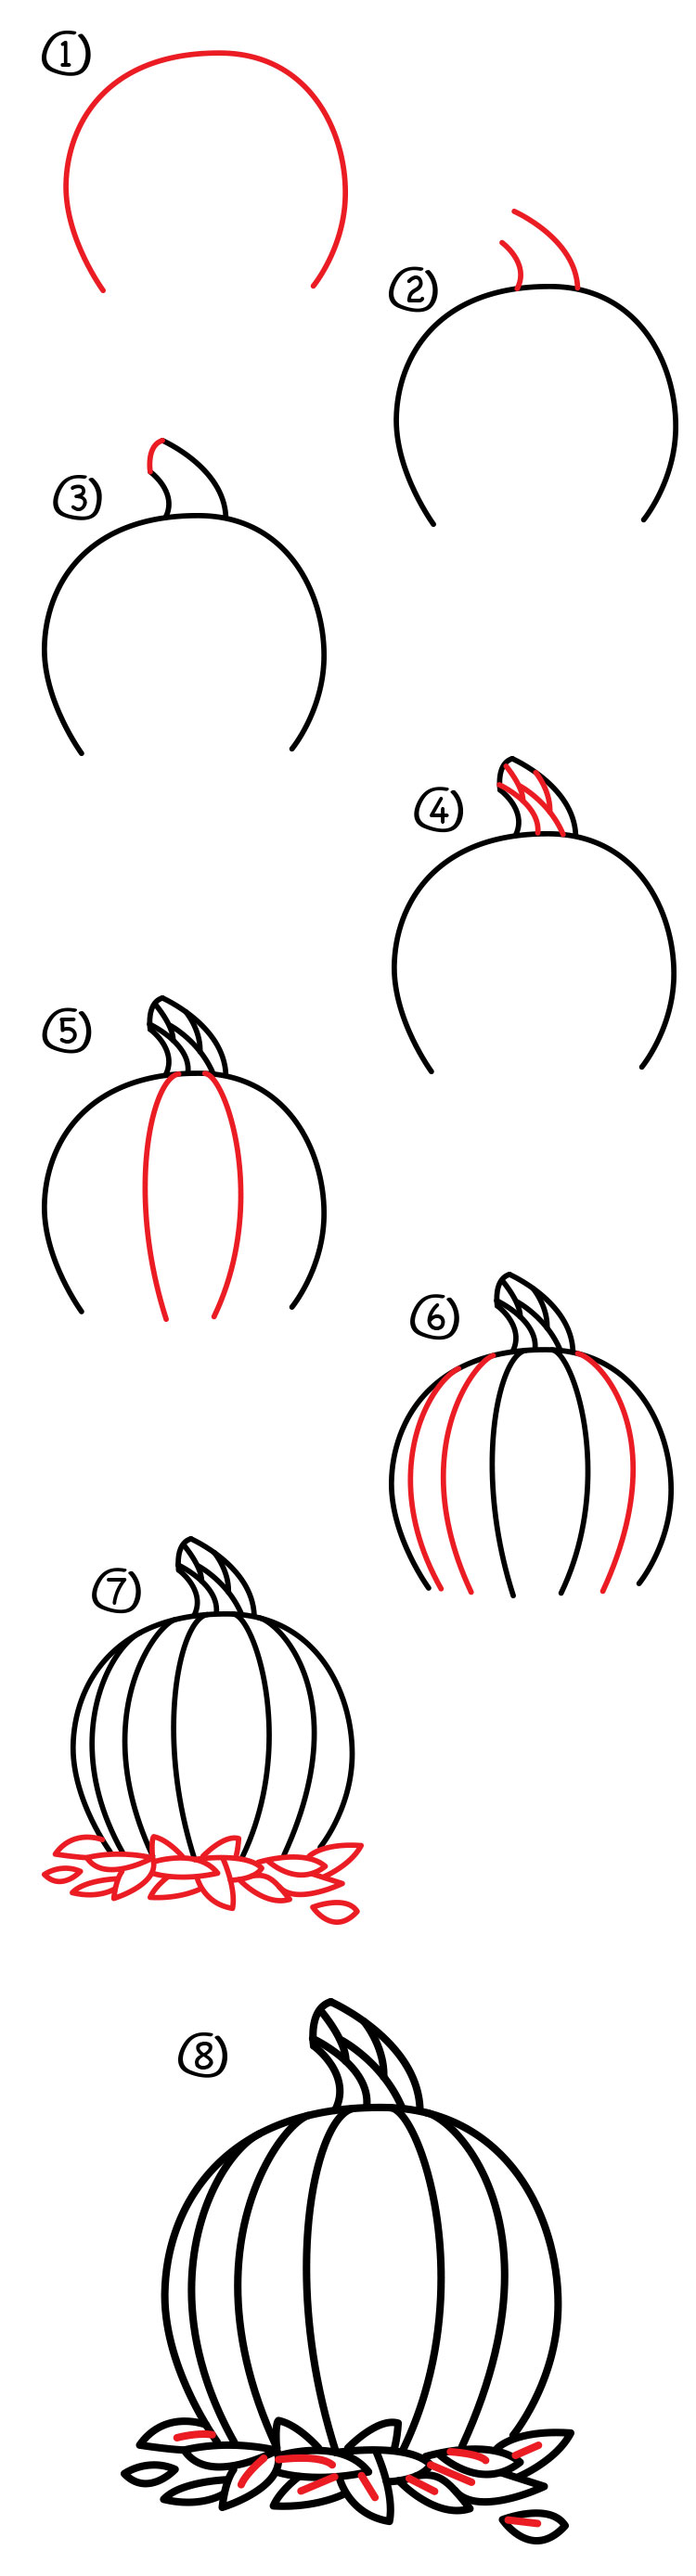 How To Draw A Pumpkin For Thanksgiving